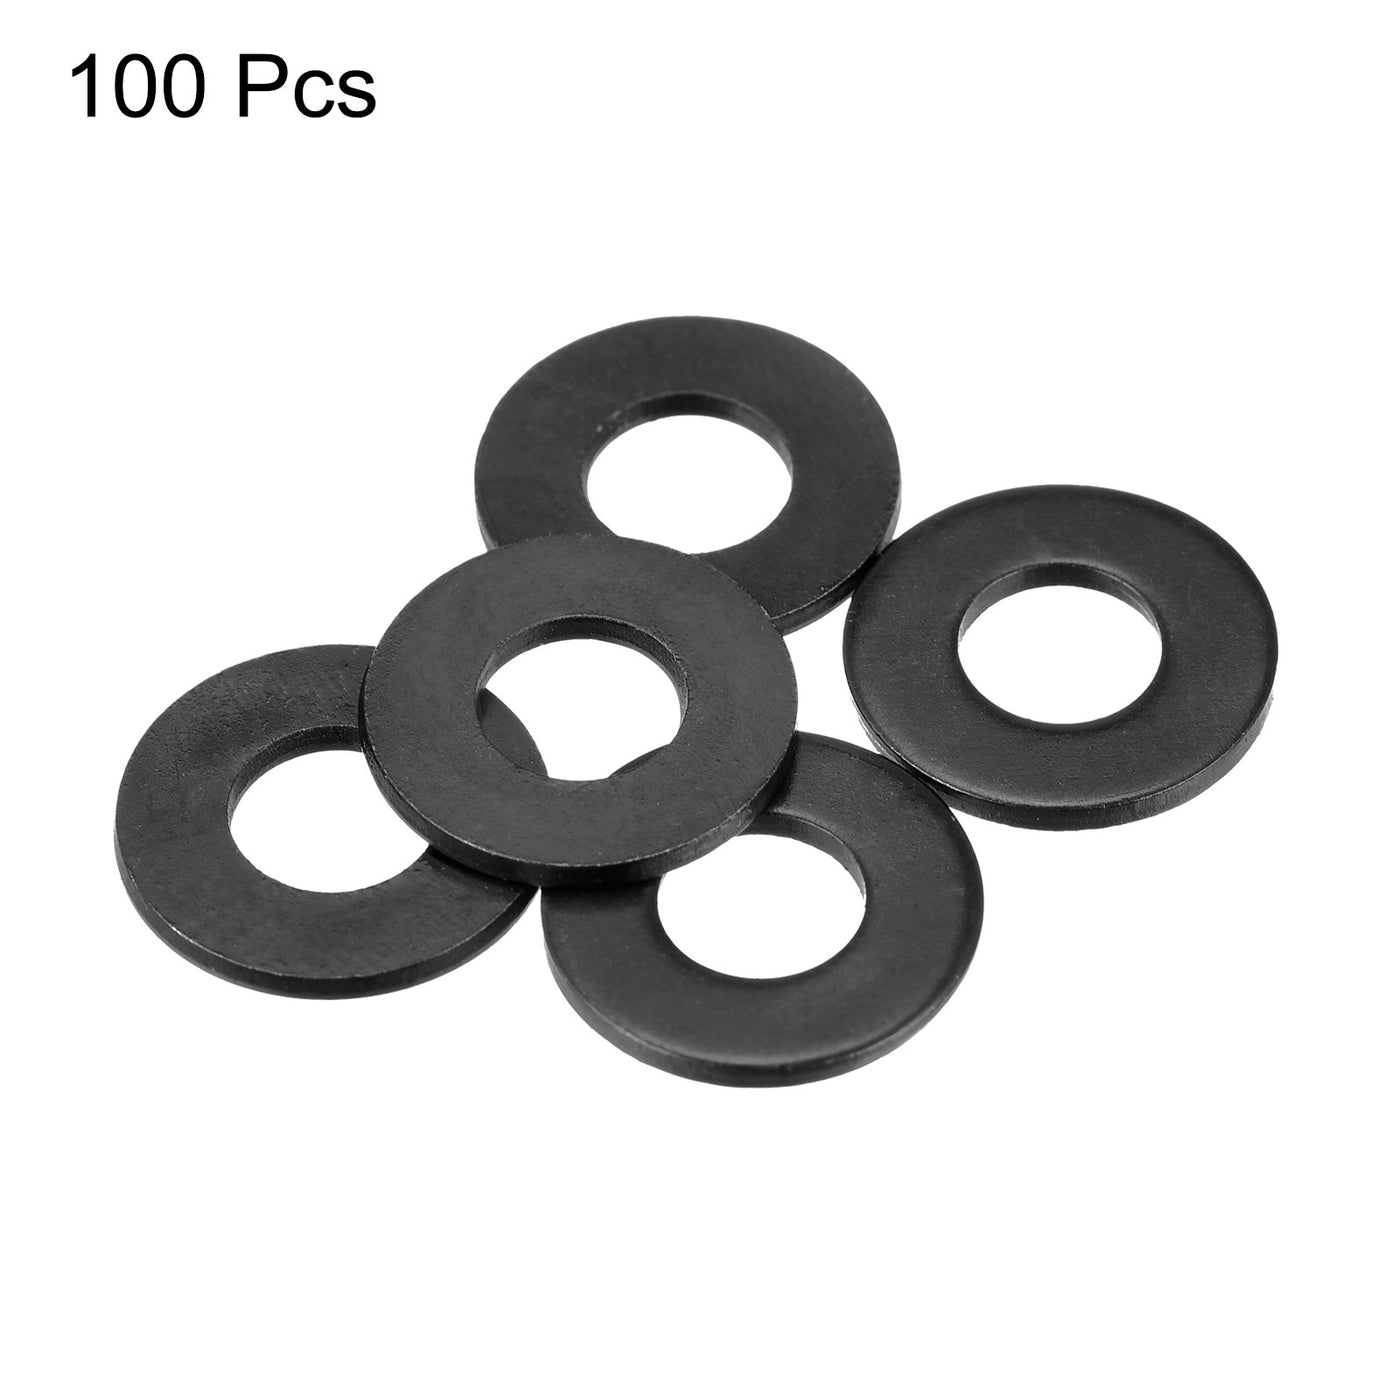 uxcell Uxcell 1/4-Inch Flat Washer, Alloy Steel Black Oxide Finish Pack of 100